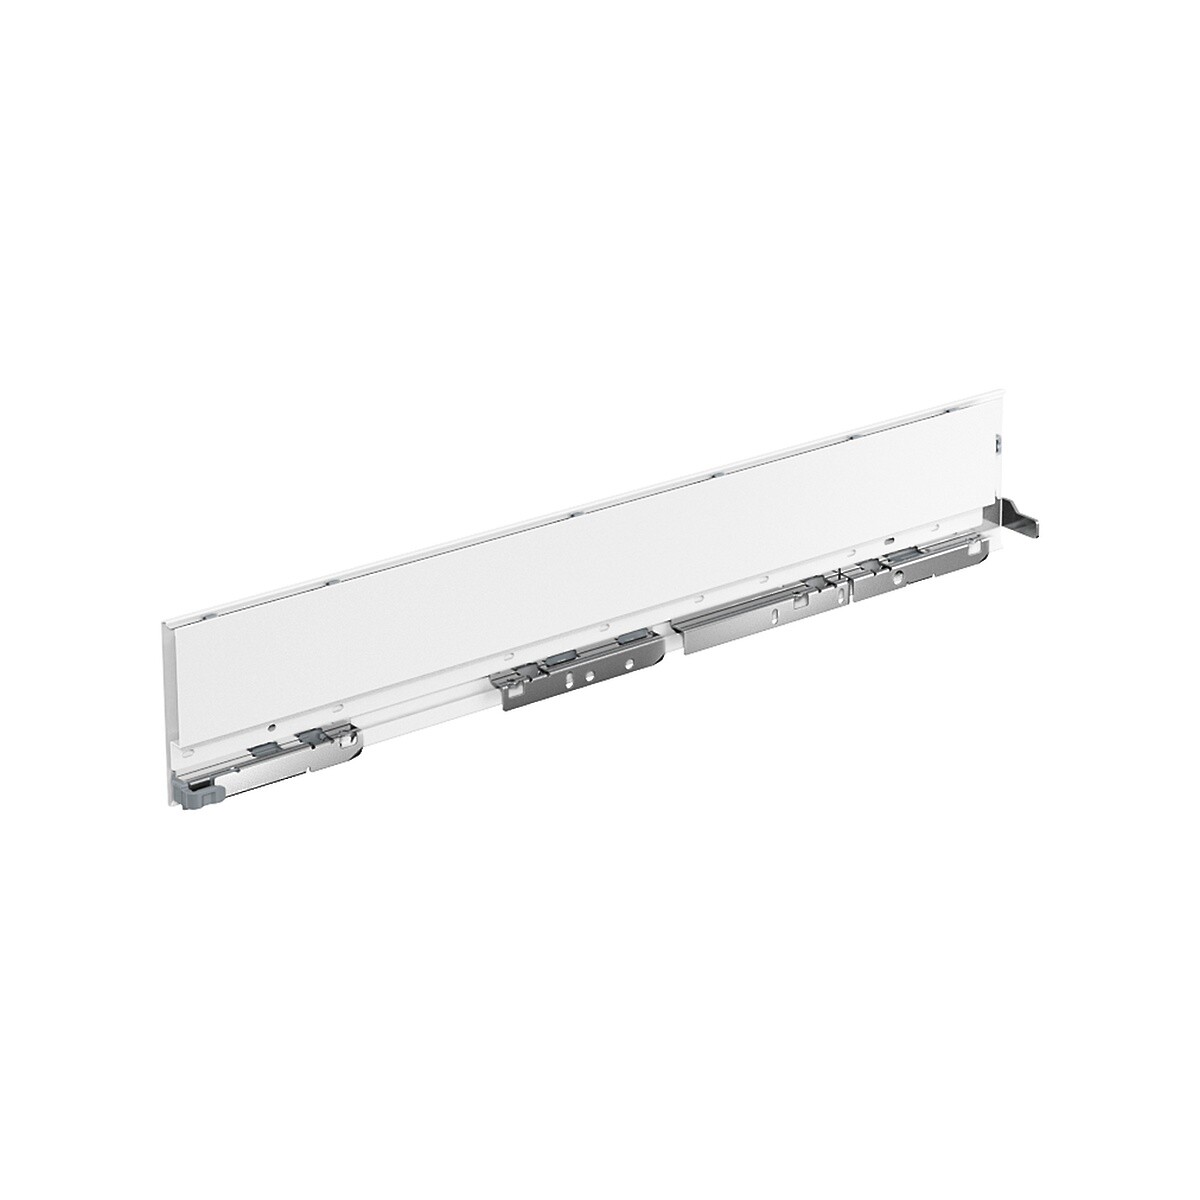 AvanTech YOU Drawer side profile, height 101 mm x NL 350 mm, White, Right